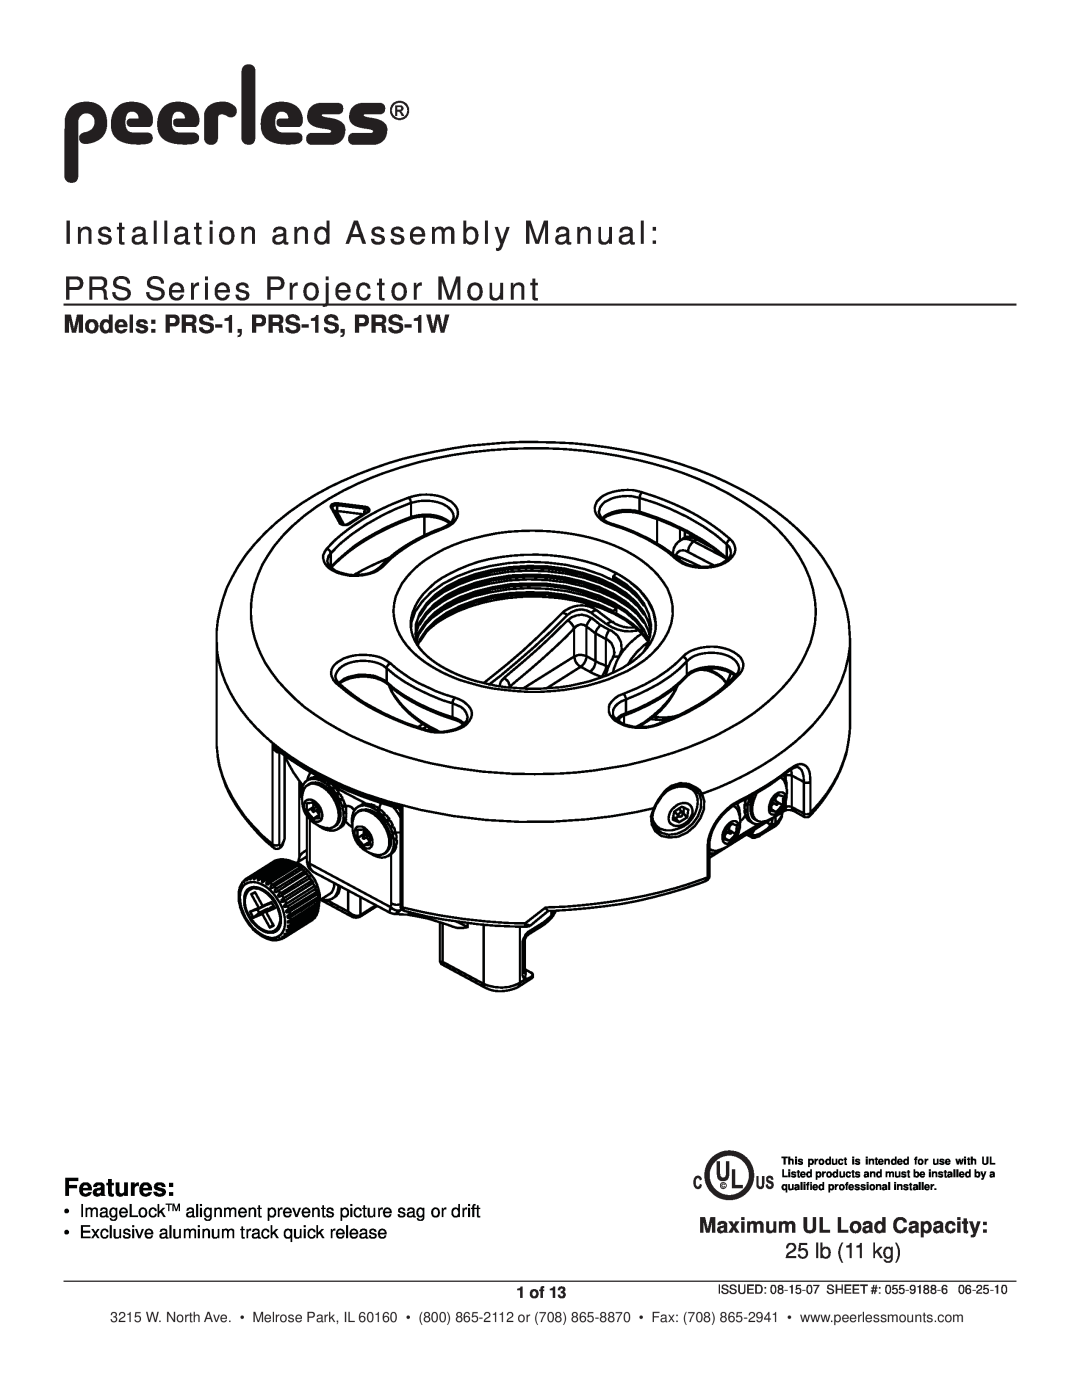 Peerless Industries PRS-1W manual Installation and Assembly Manual PRS Series Projector Mount, Maximum UL Load Capacity 